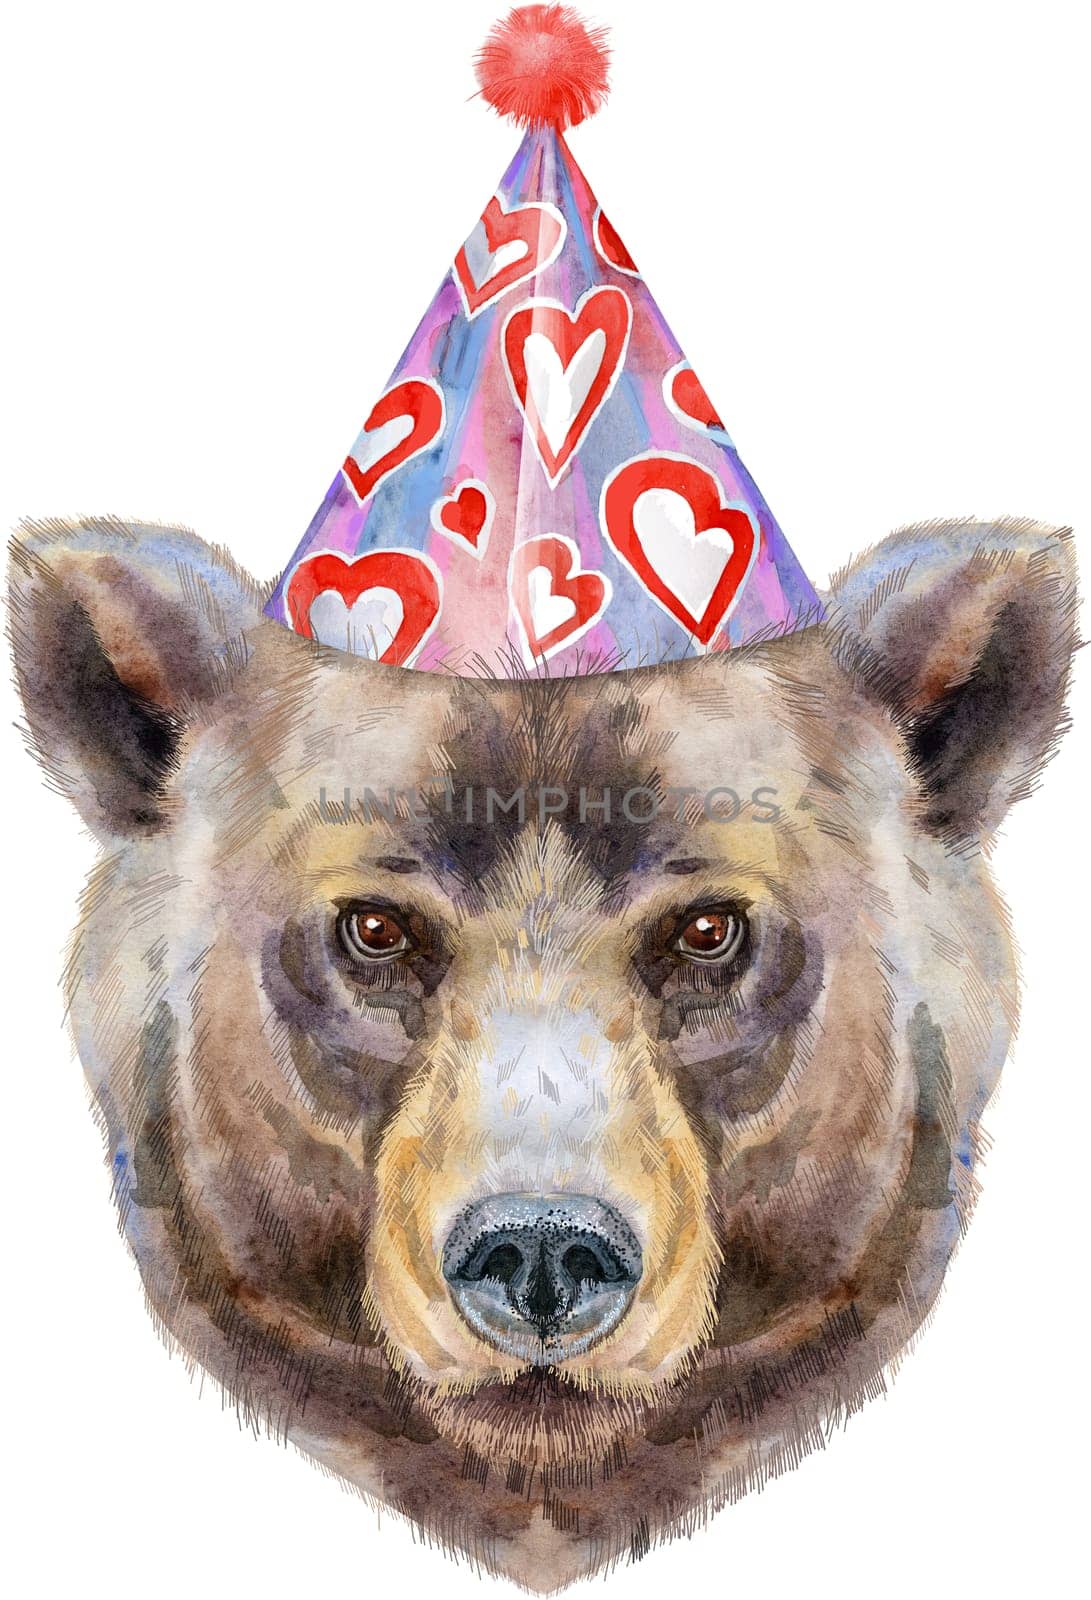 Bear head in party hat. Watercolor bear painting illustration isolated on white background by NataOmsk